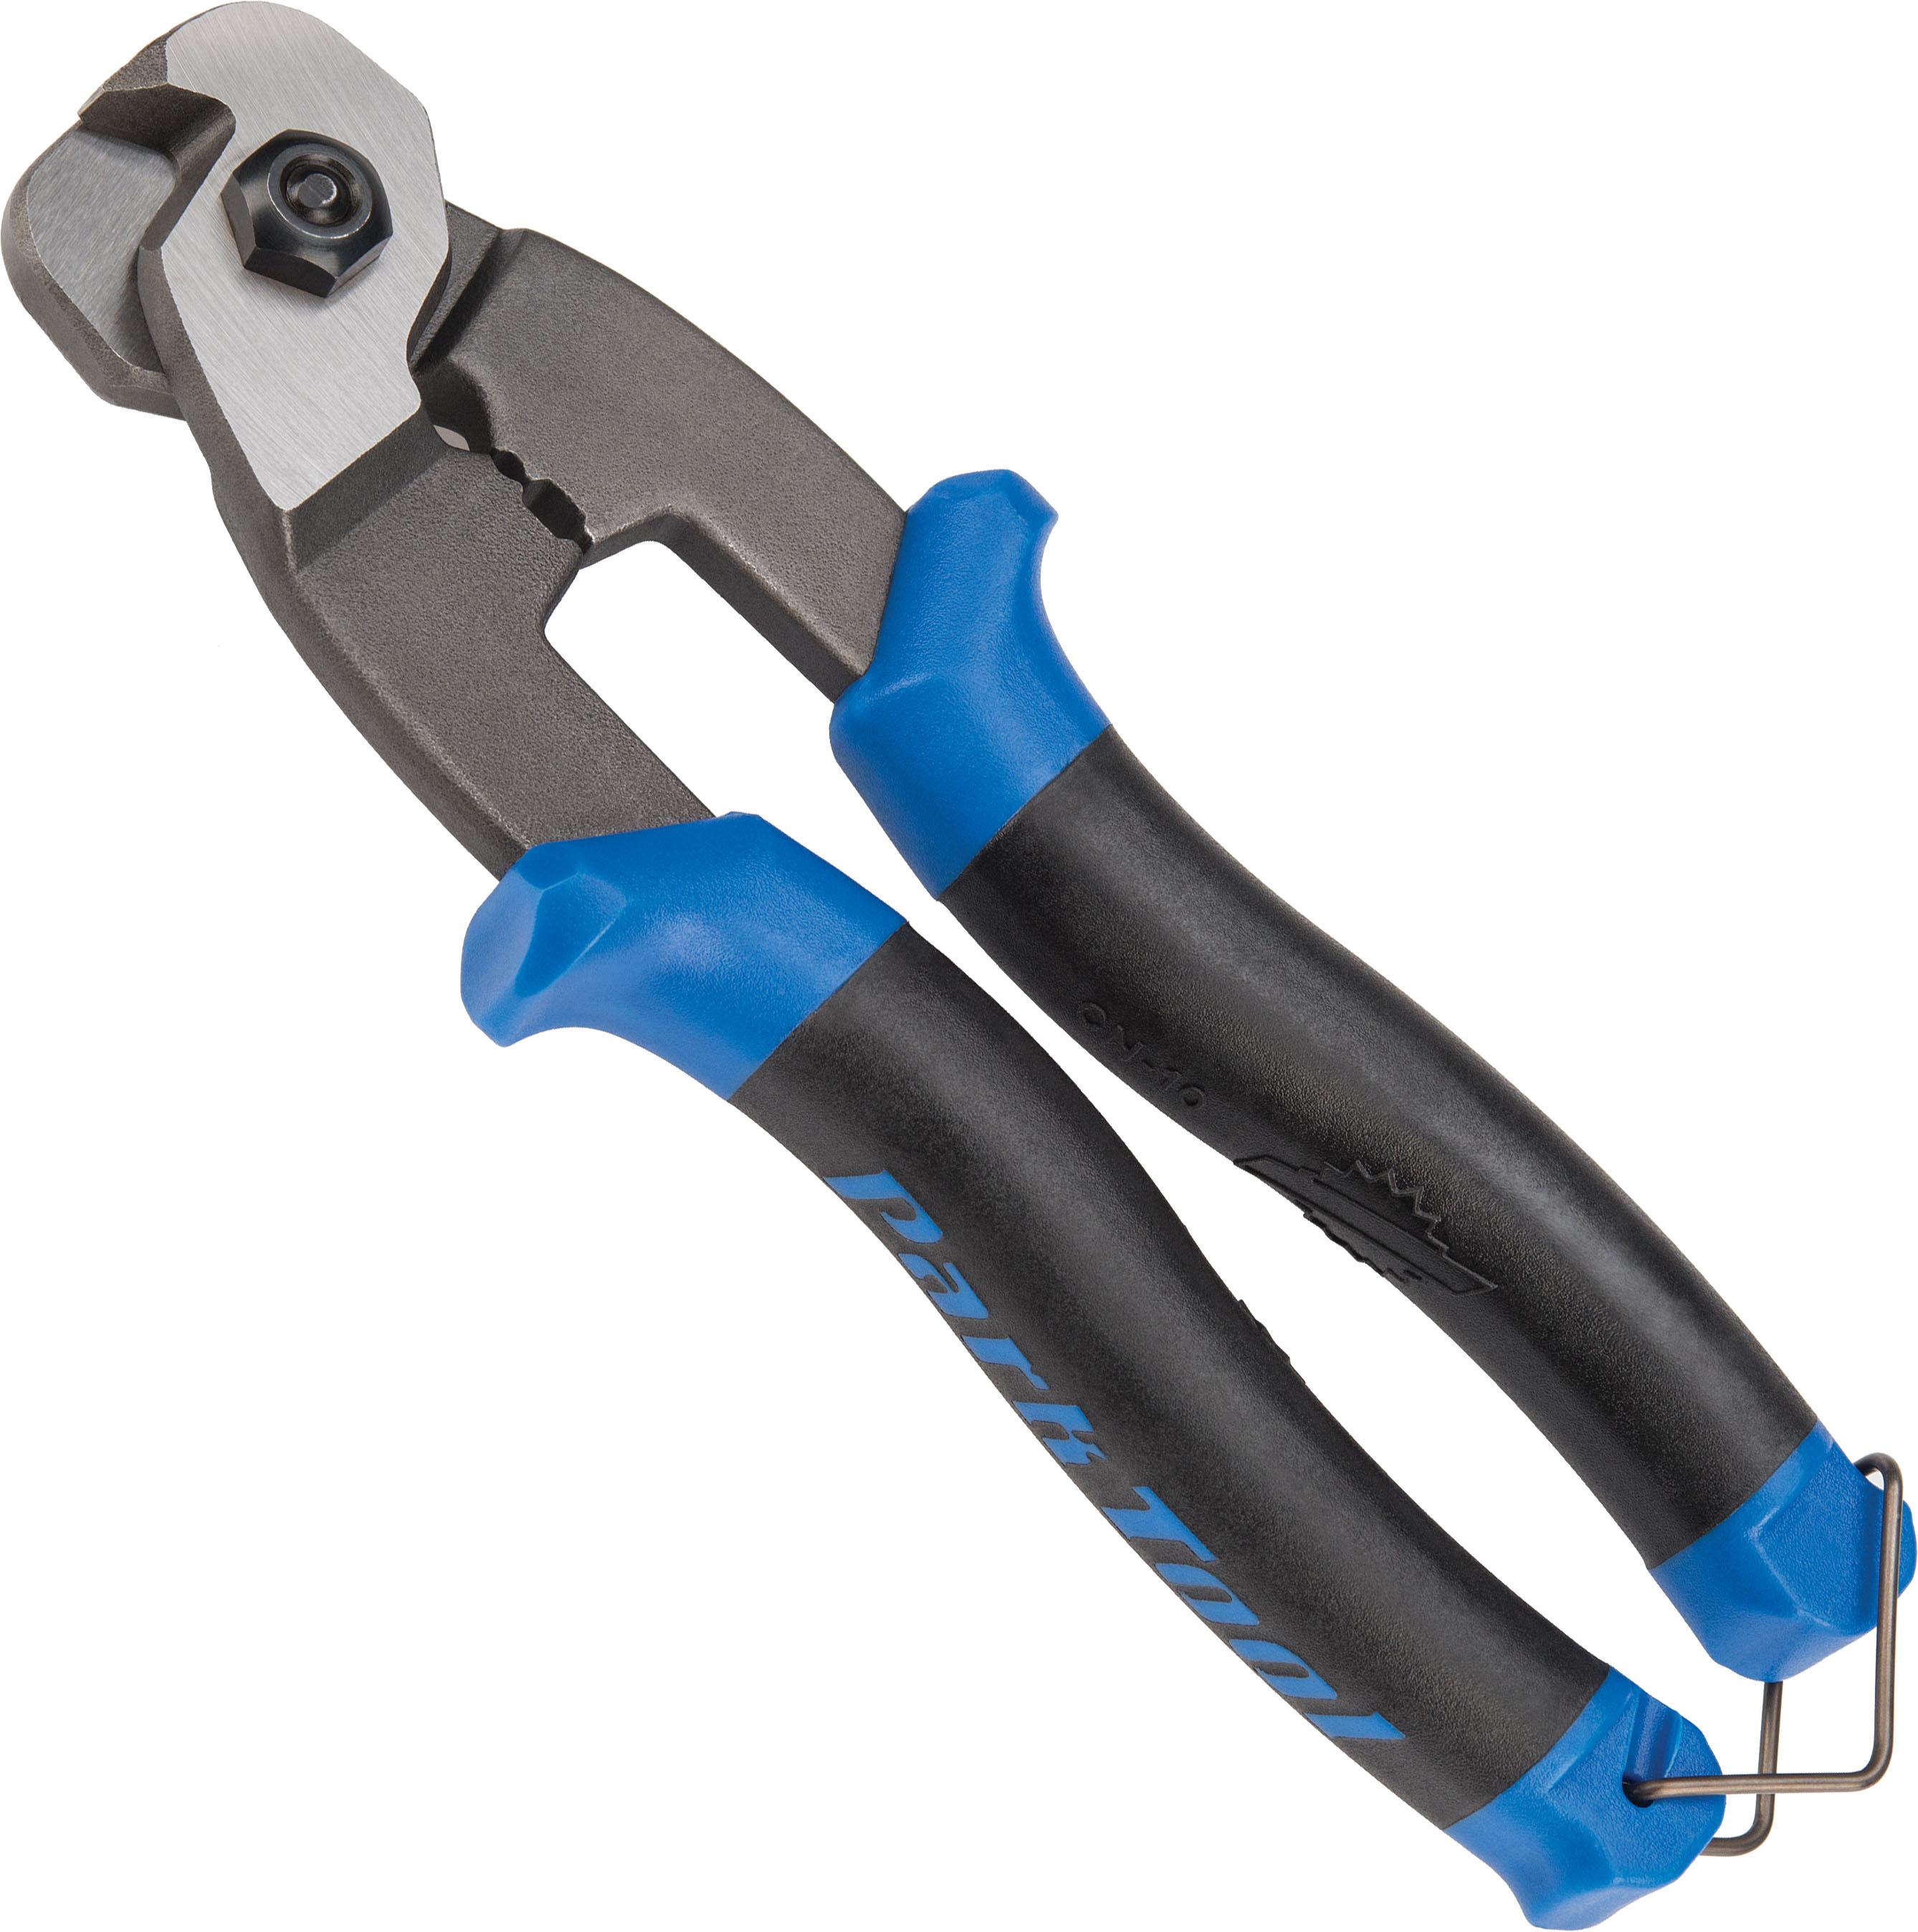 Park Tool Cable Cutter Cn-10 - Blue/black